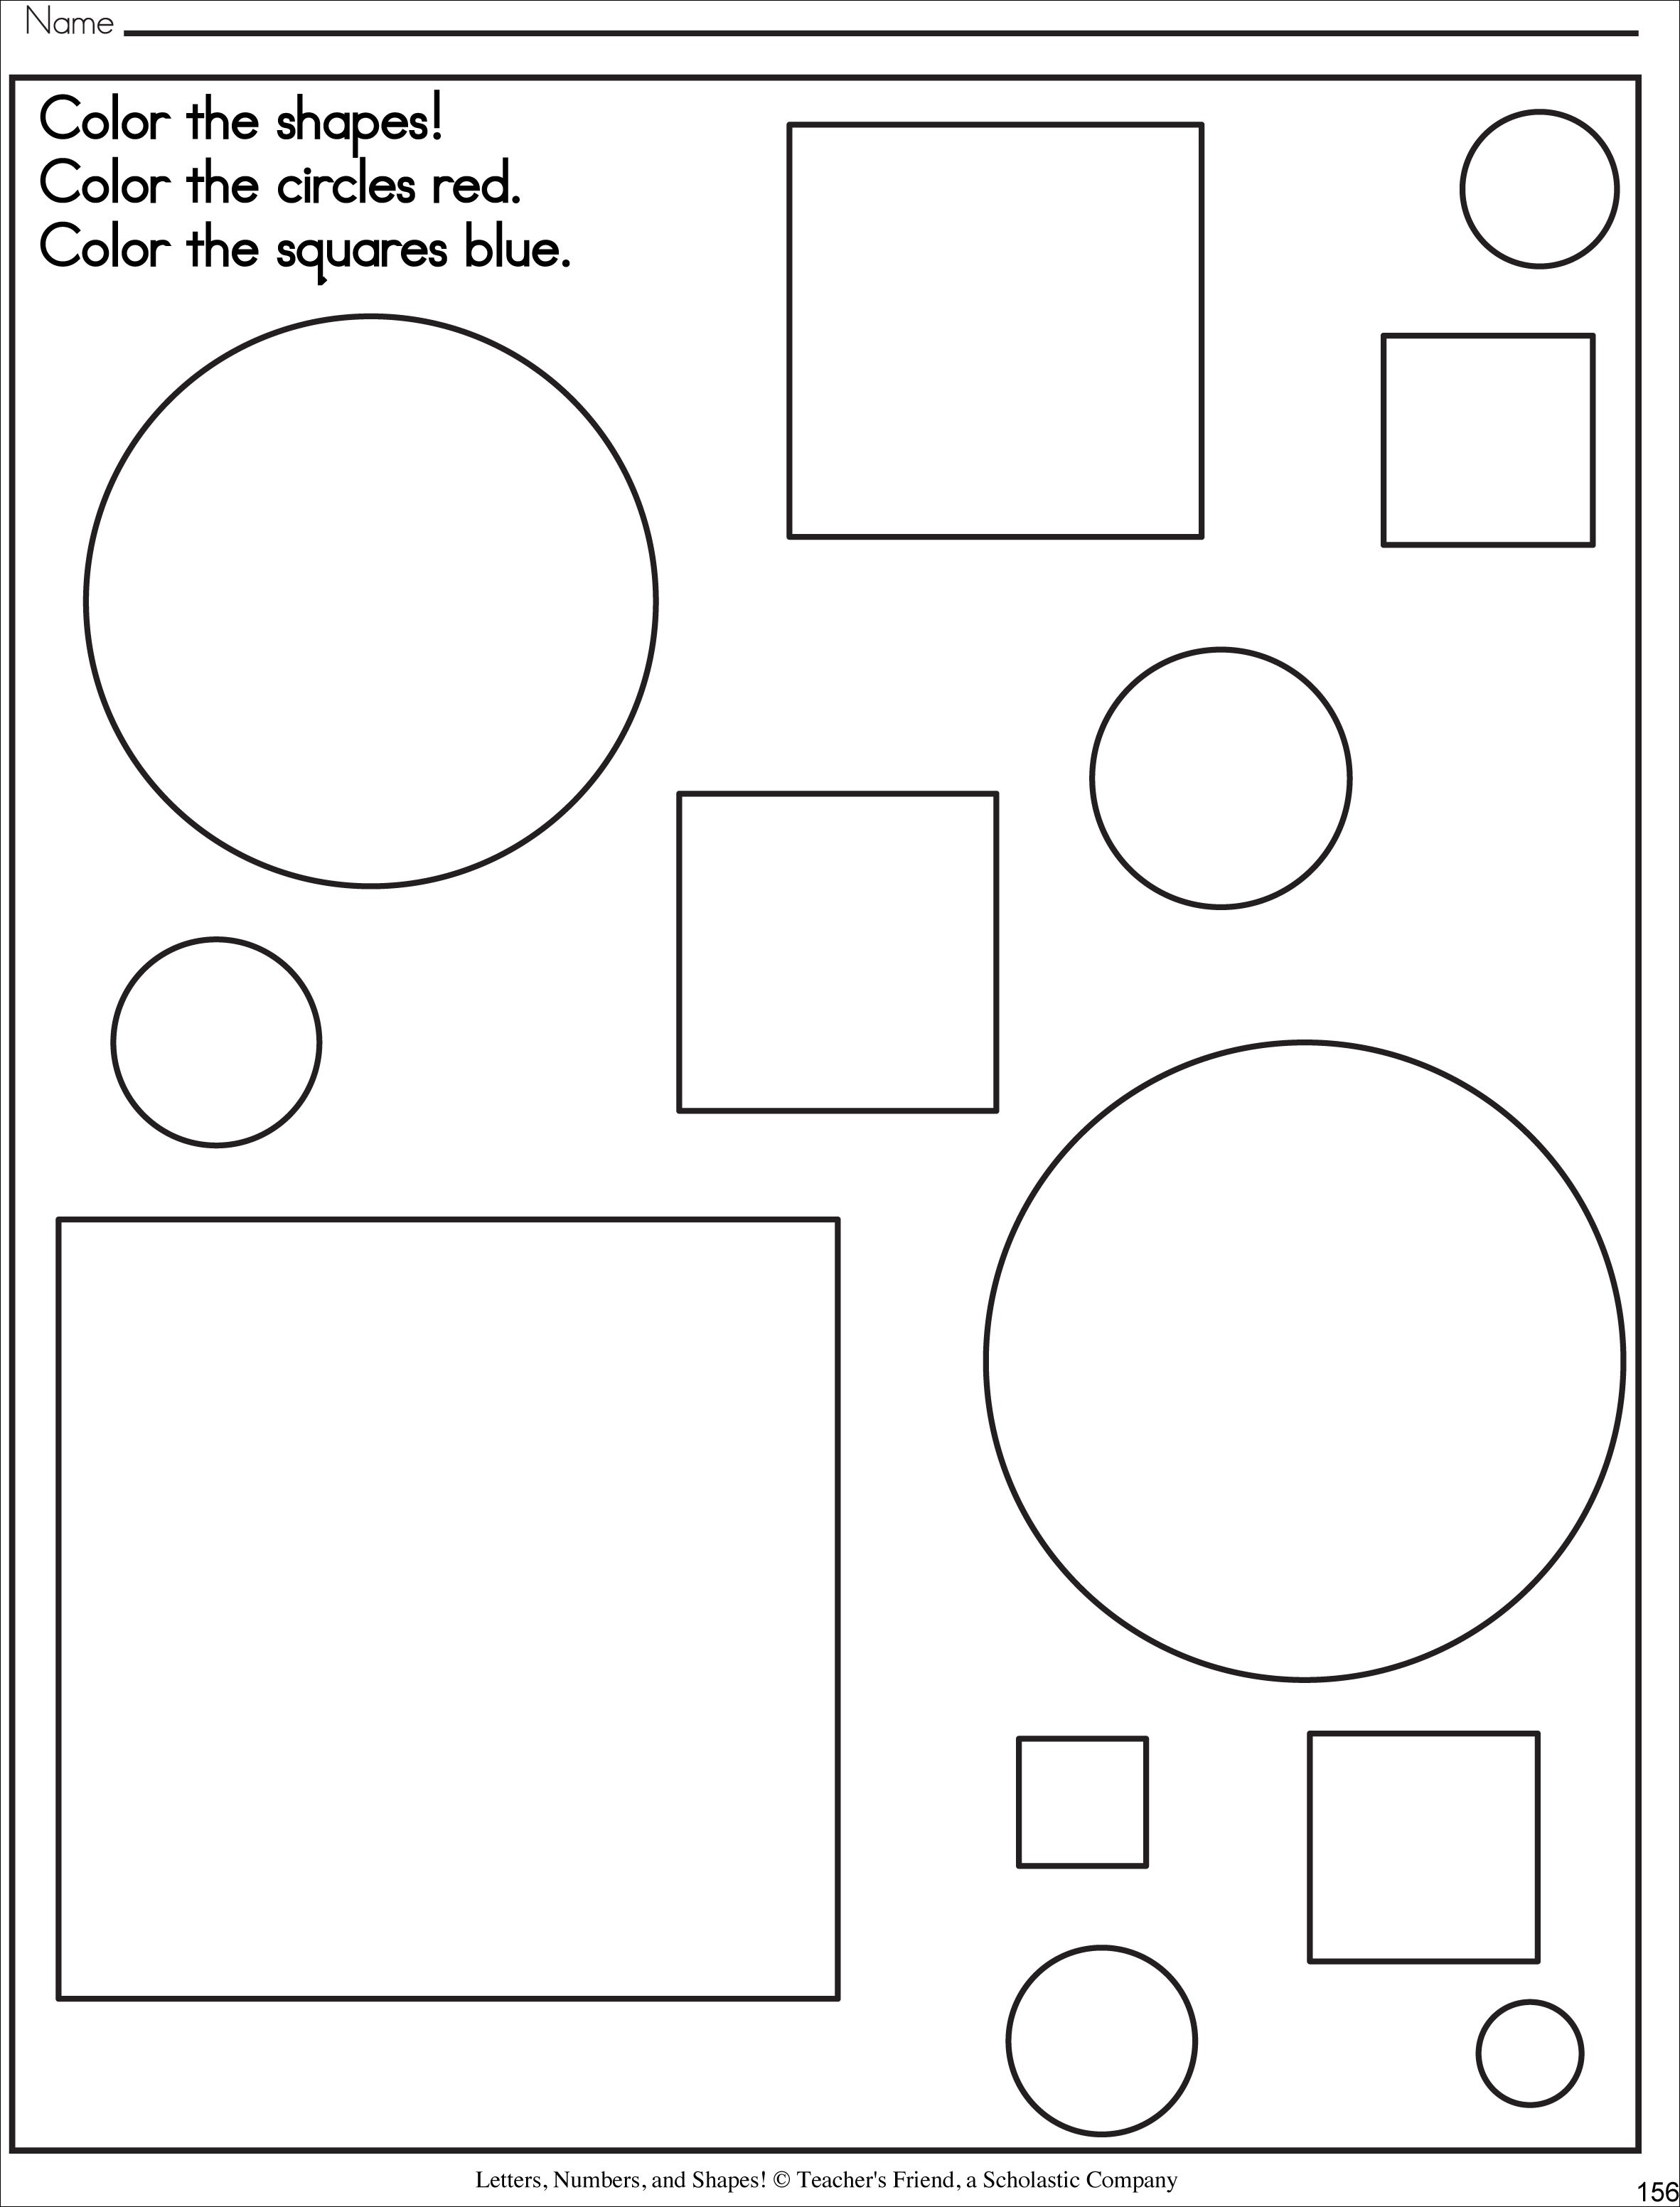 shapes_coloring_pages_pre_k_coloring_pages_